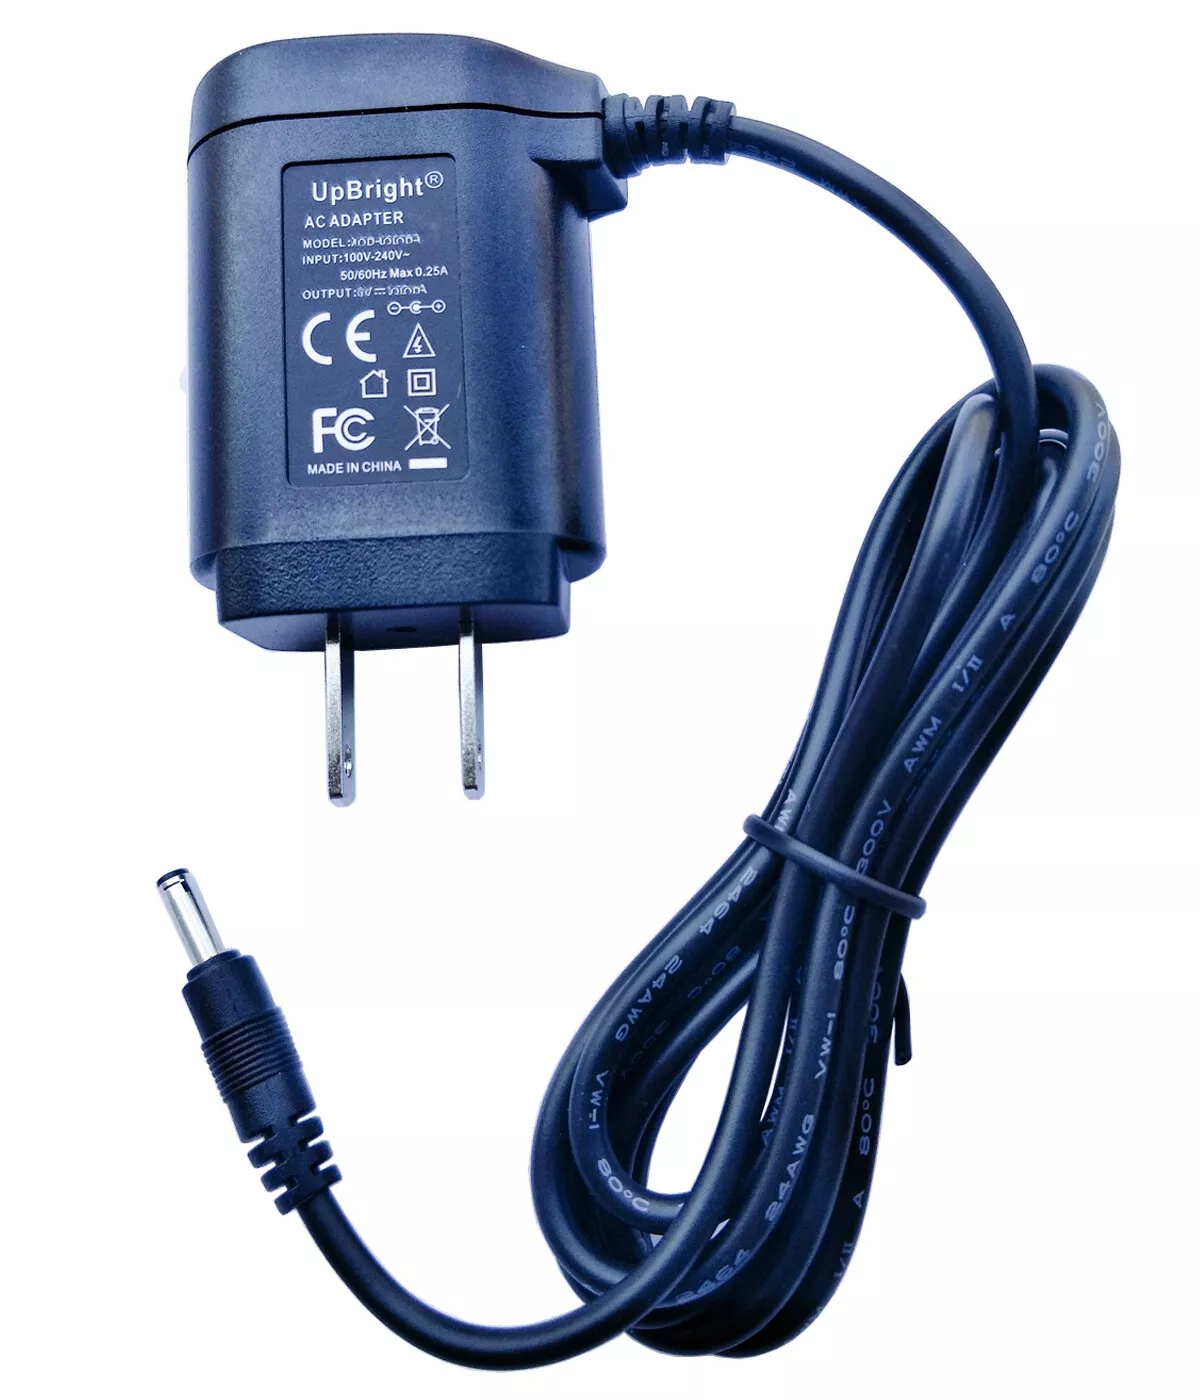 *Brand NEW*6V AC DC Adapter For HON-KWANG Model No D0660 Plug In Class2 Transformer Charger Power Supply